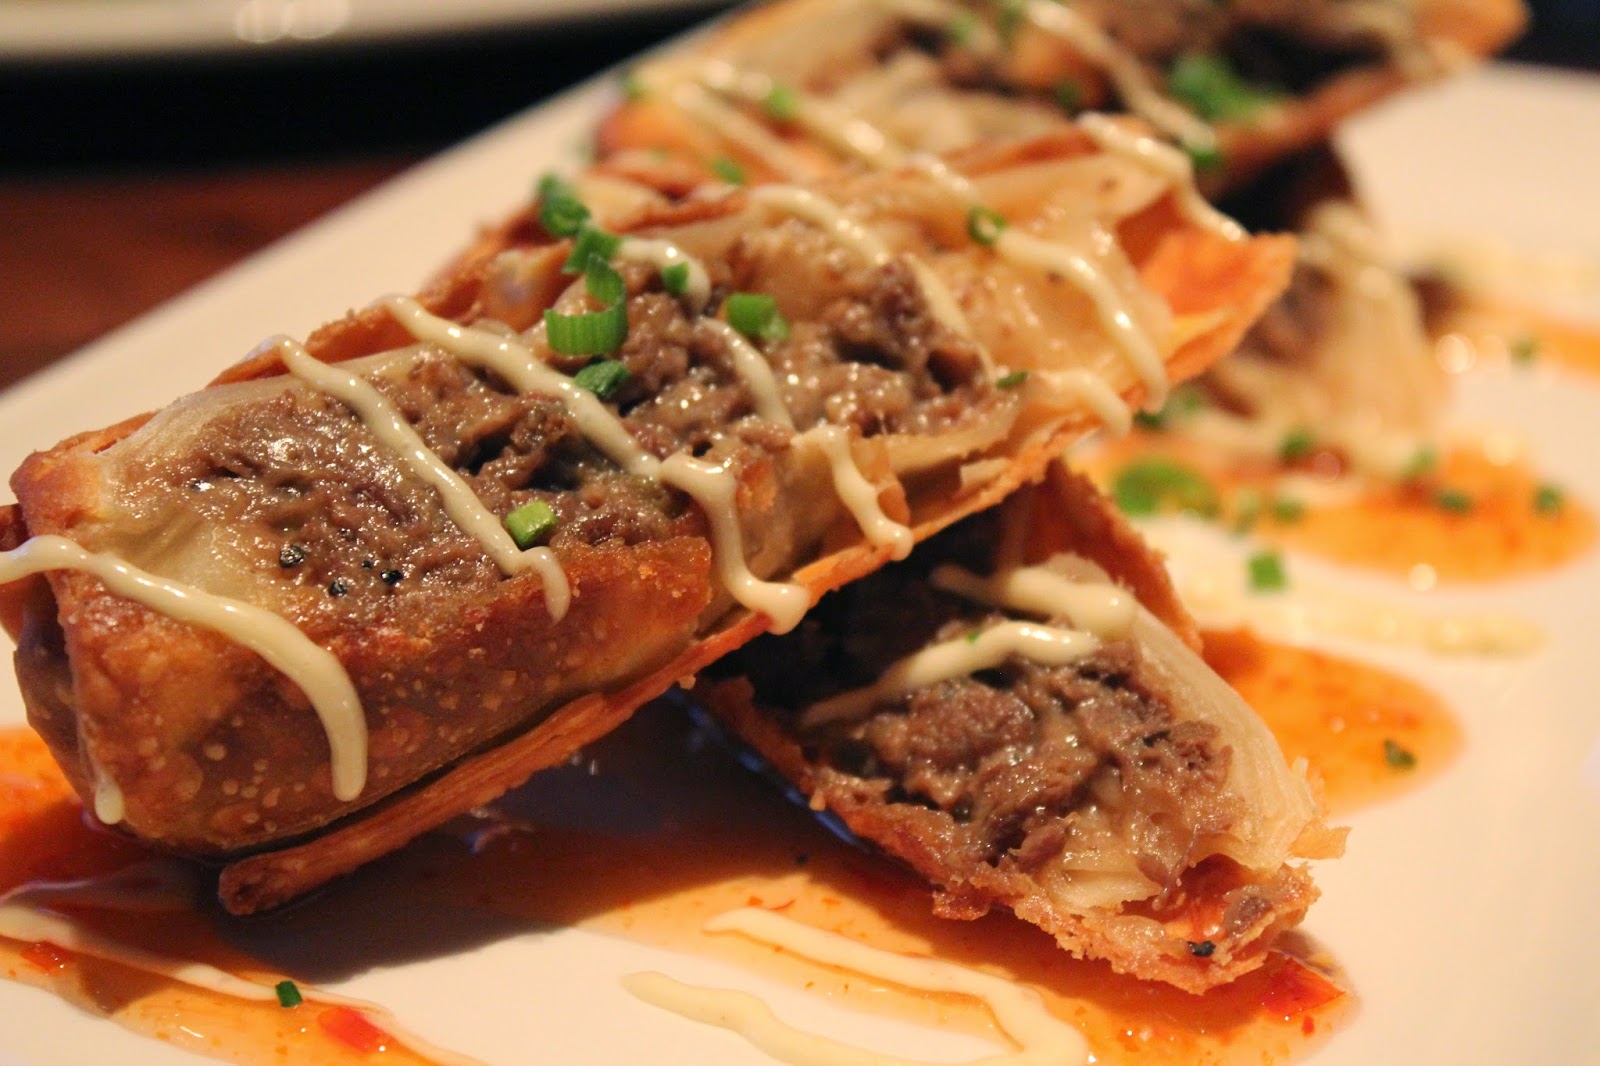 Cheesesteak egg rolls at Del Frisco's Grille